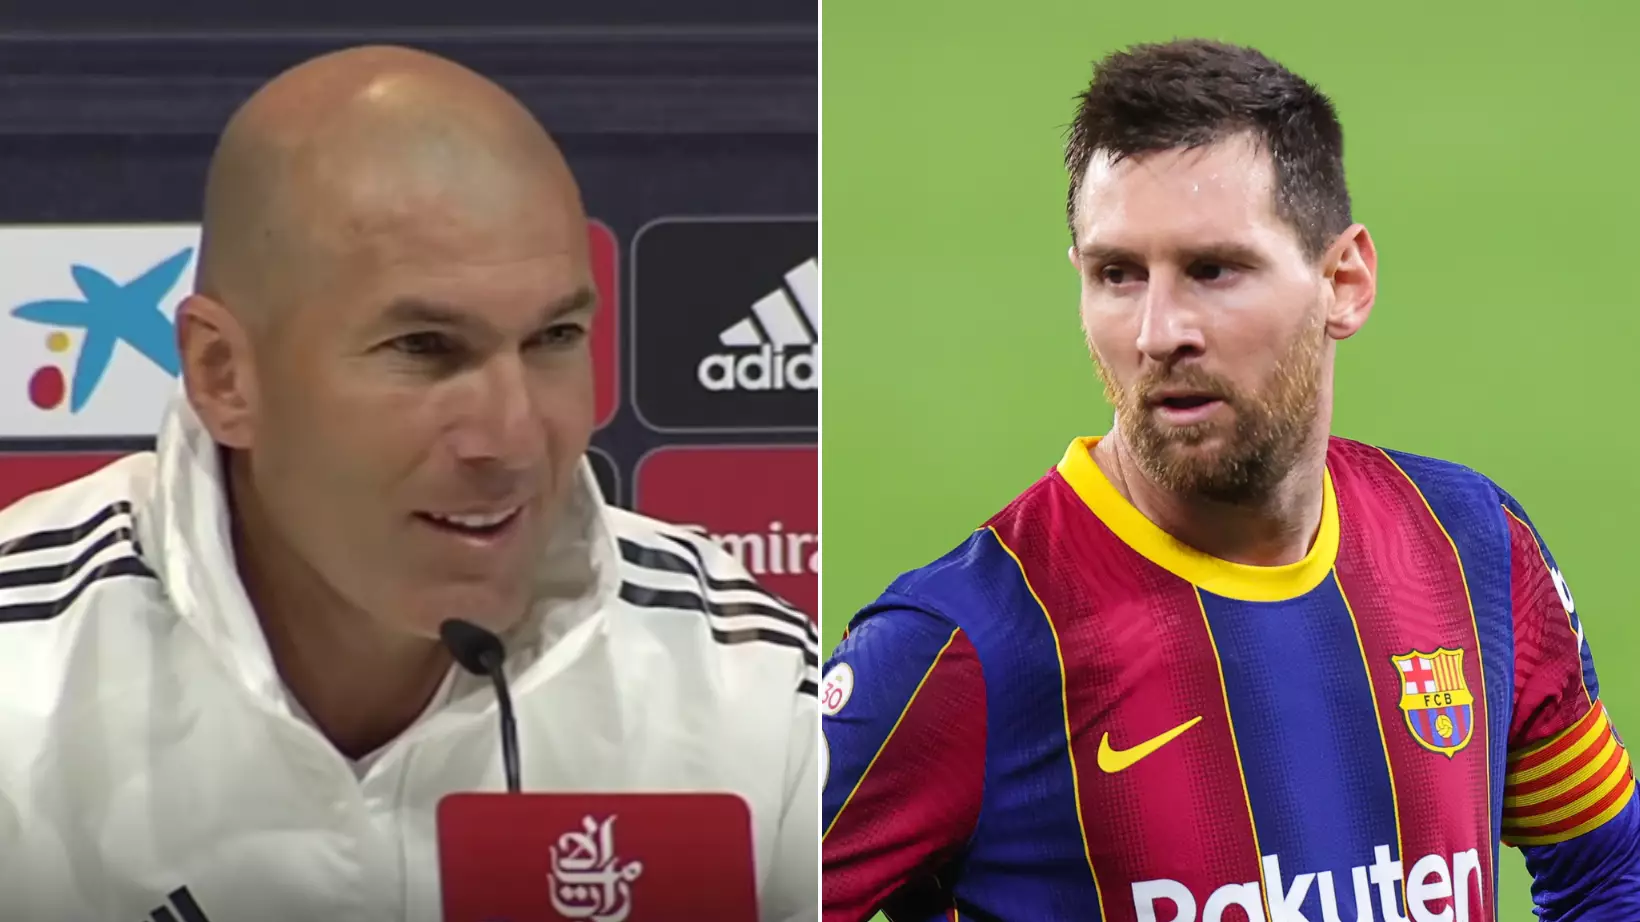 Zinedine Zidane Gives His Honest Take On Lionel Messi Potentially Playing In His Last El Clasico